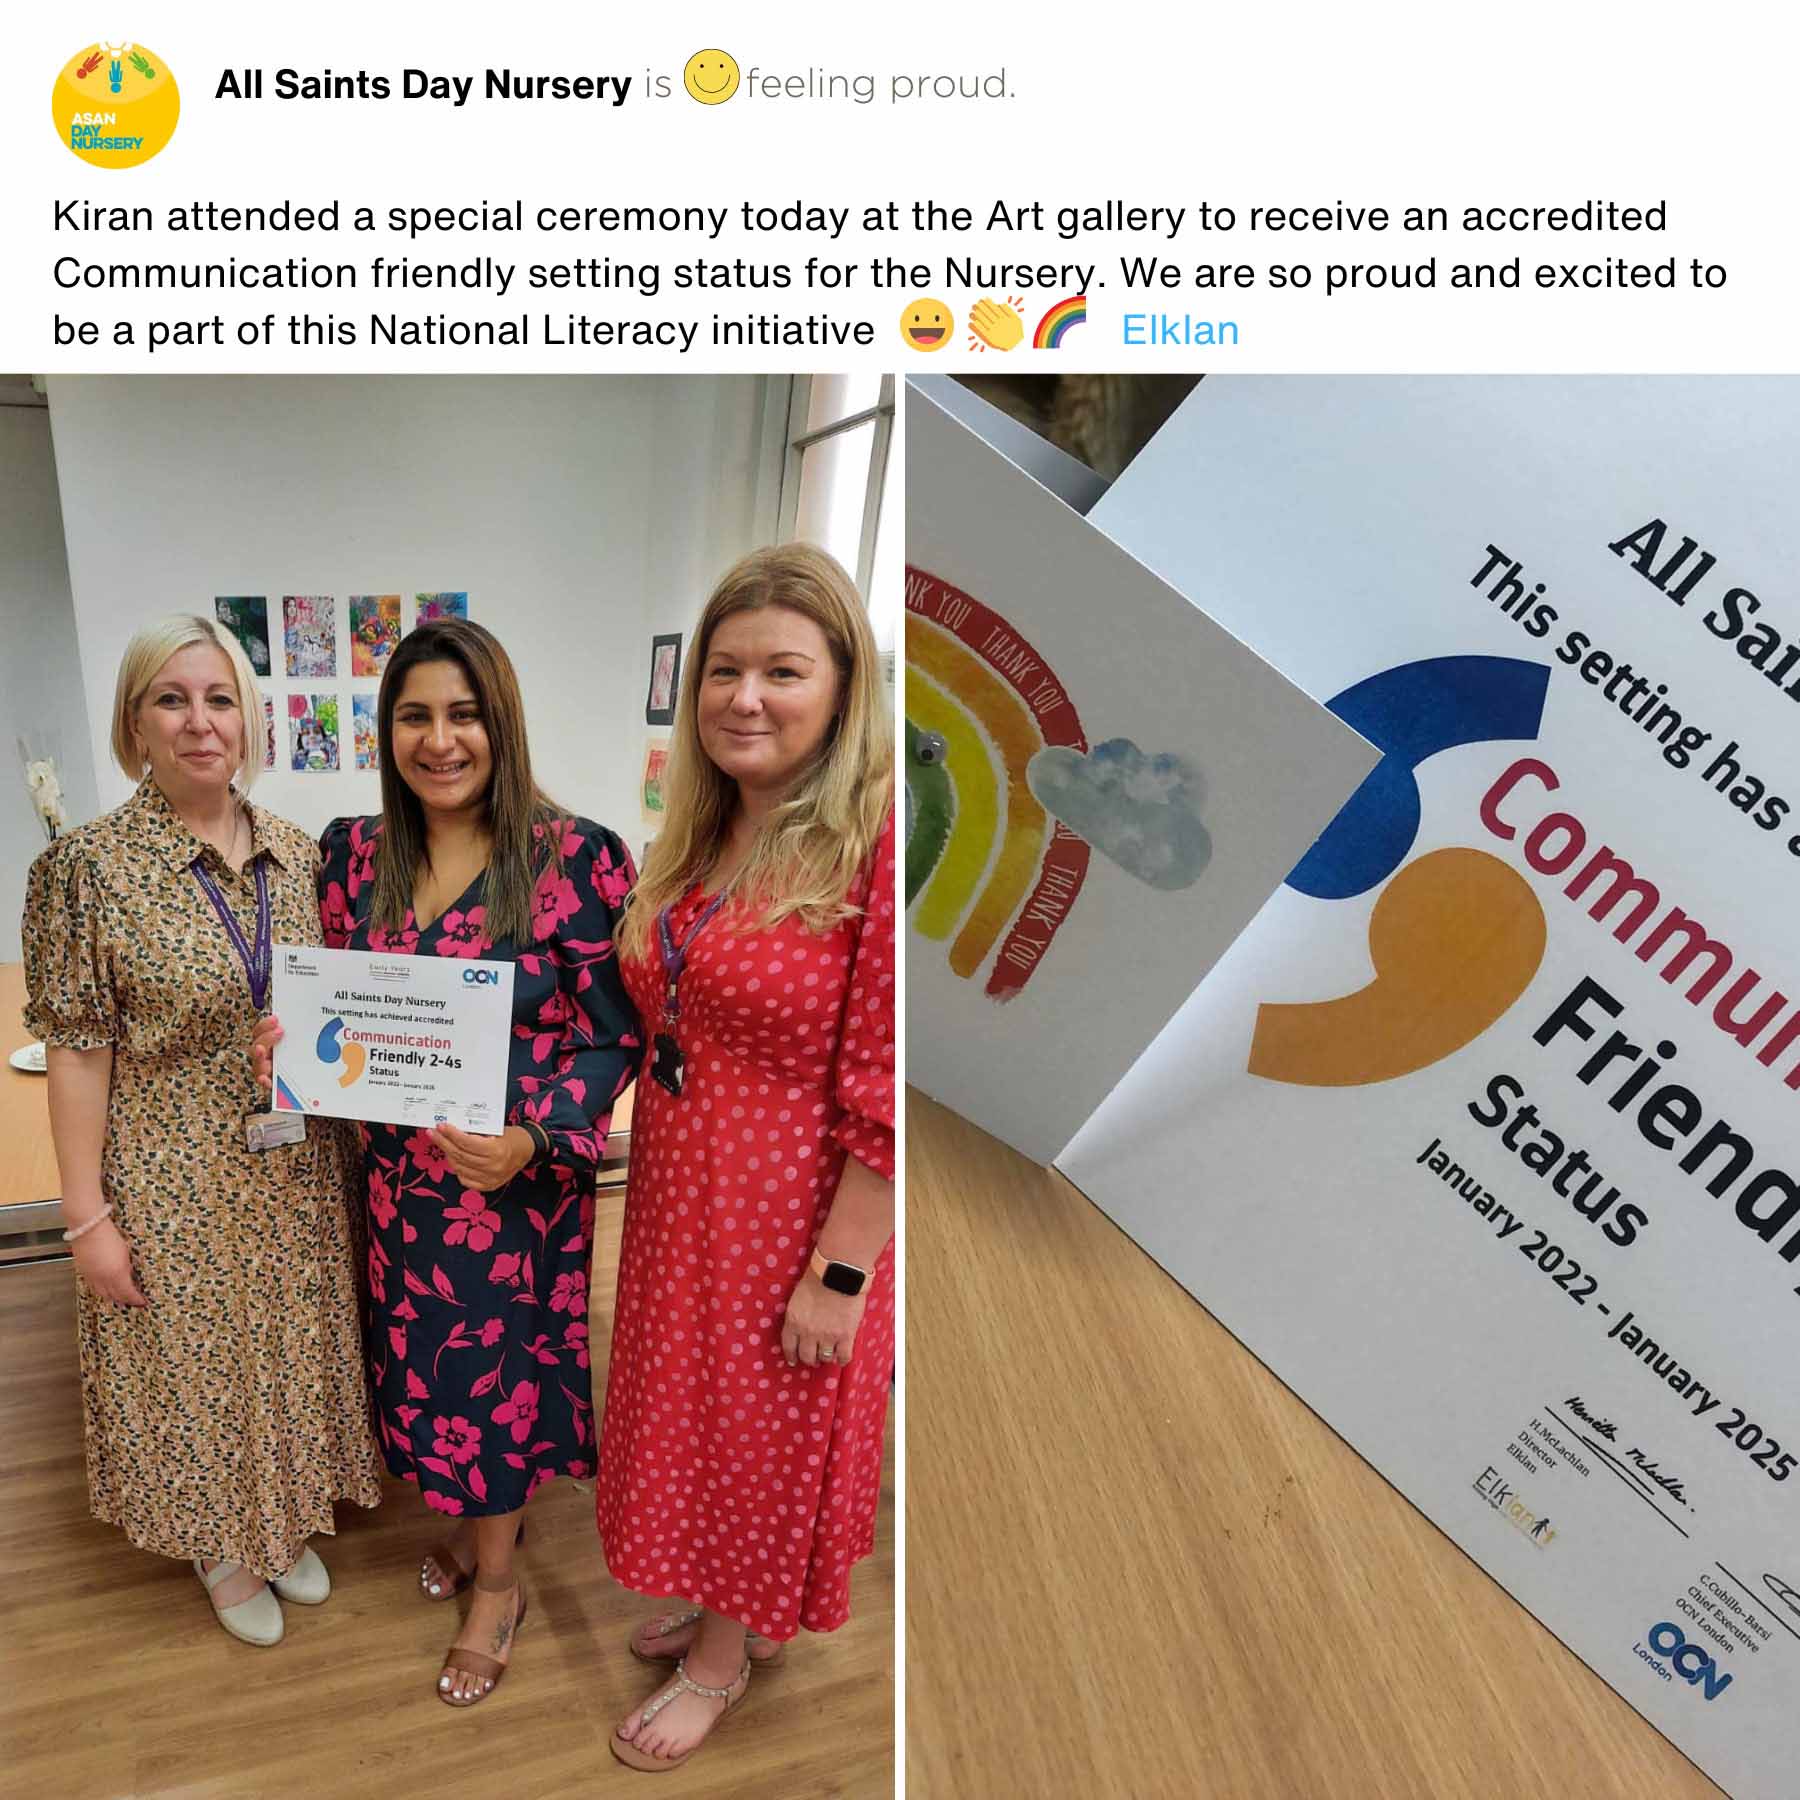 All Saints Day Nursery: is feeling proud. Kiran attended a special ceremony today at the Art gallery to receive an accredited Communication Friendly Setting status for the Nursery. We are so proud and excited to be part of this National Literacy initiative.